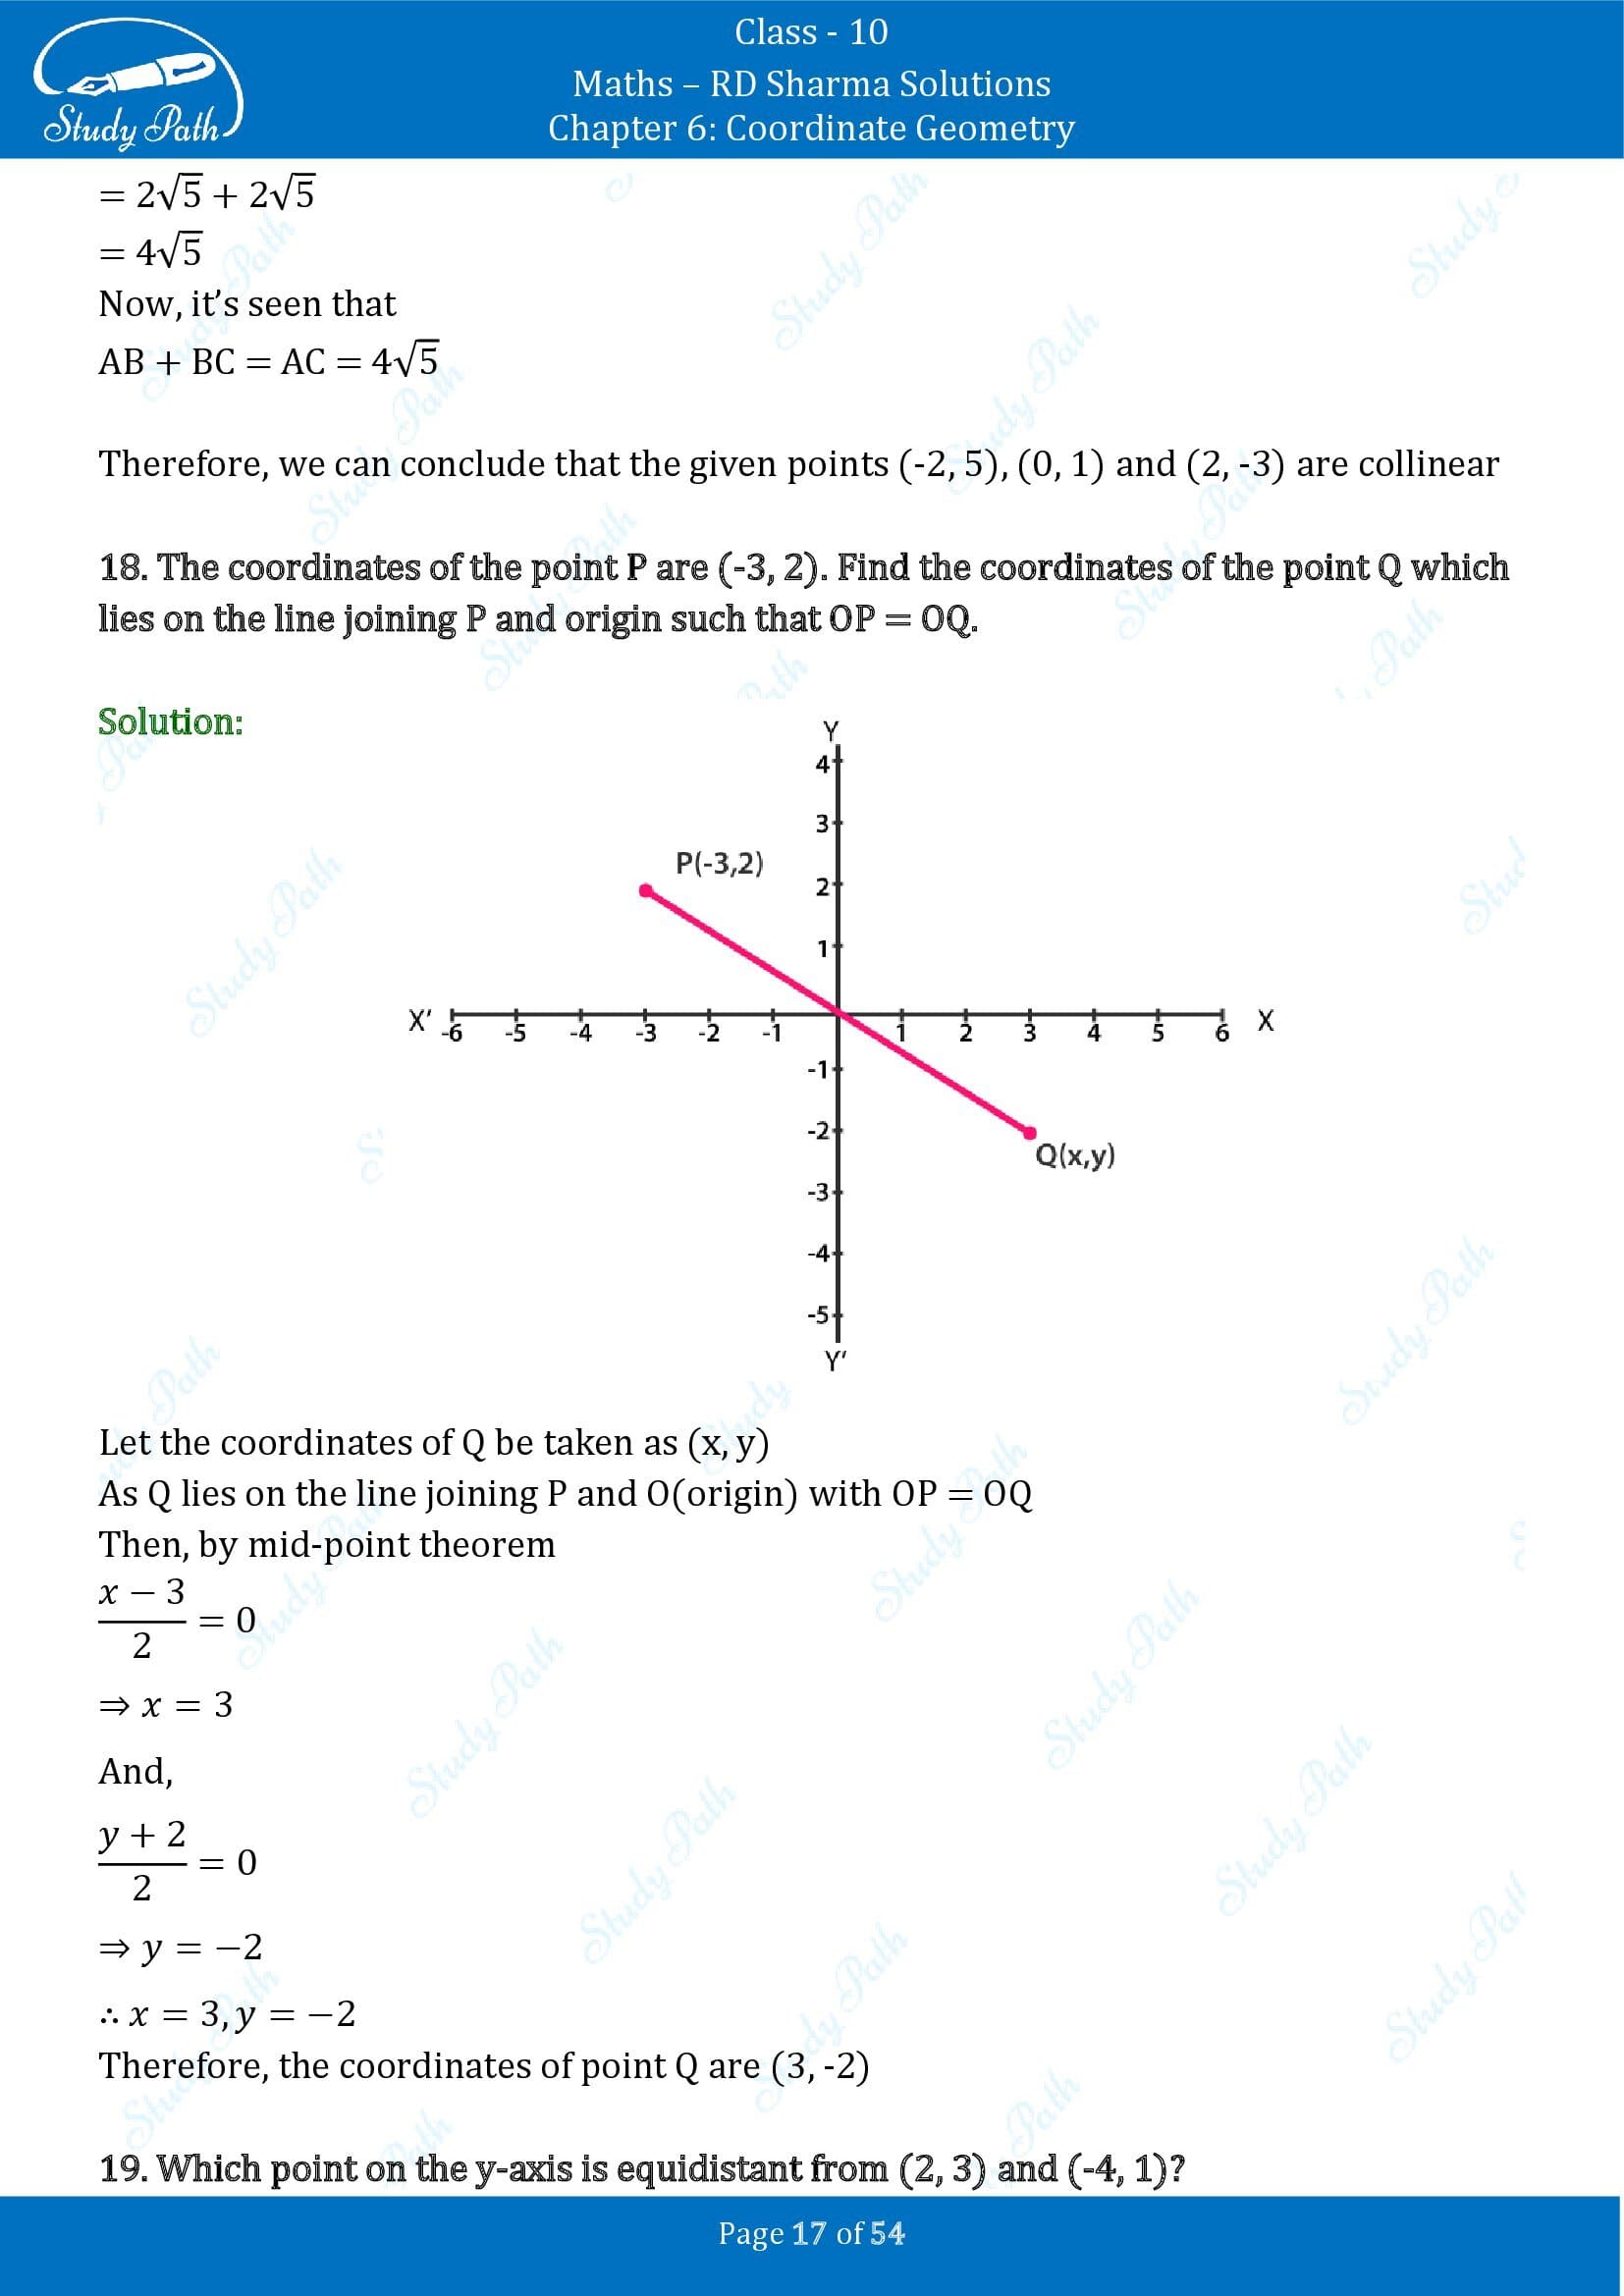 RD Sharma Solutions Class 10 Chapter 6 Coordinate Geometry Exercise 6.2 0017